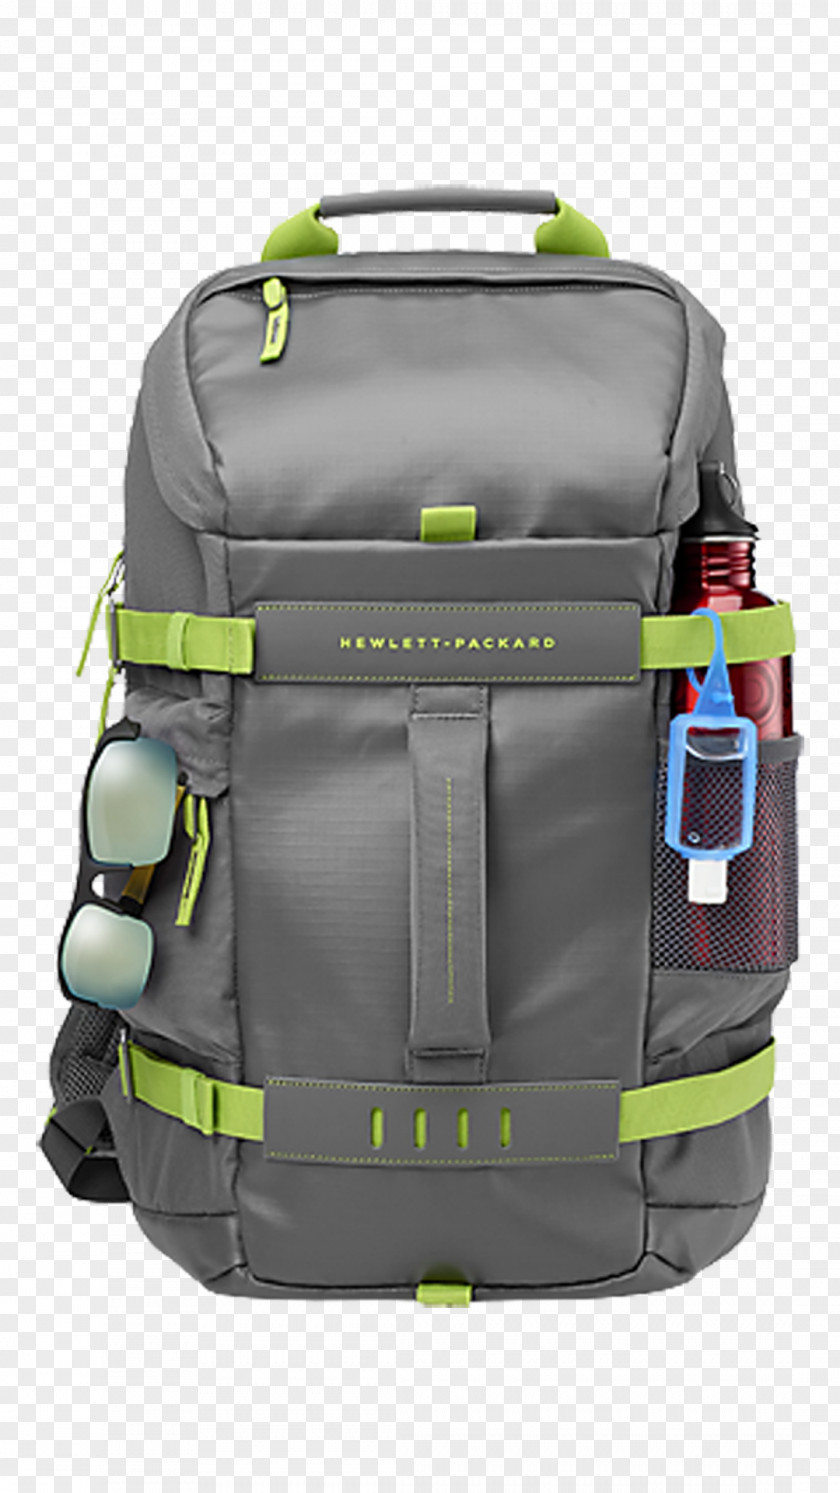 Backpack Laptop Dell HP Pavilion Hewlett-Packard PNG